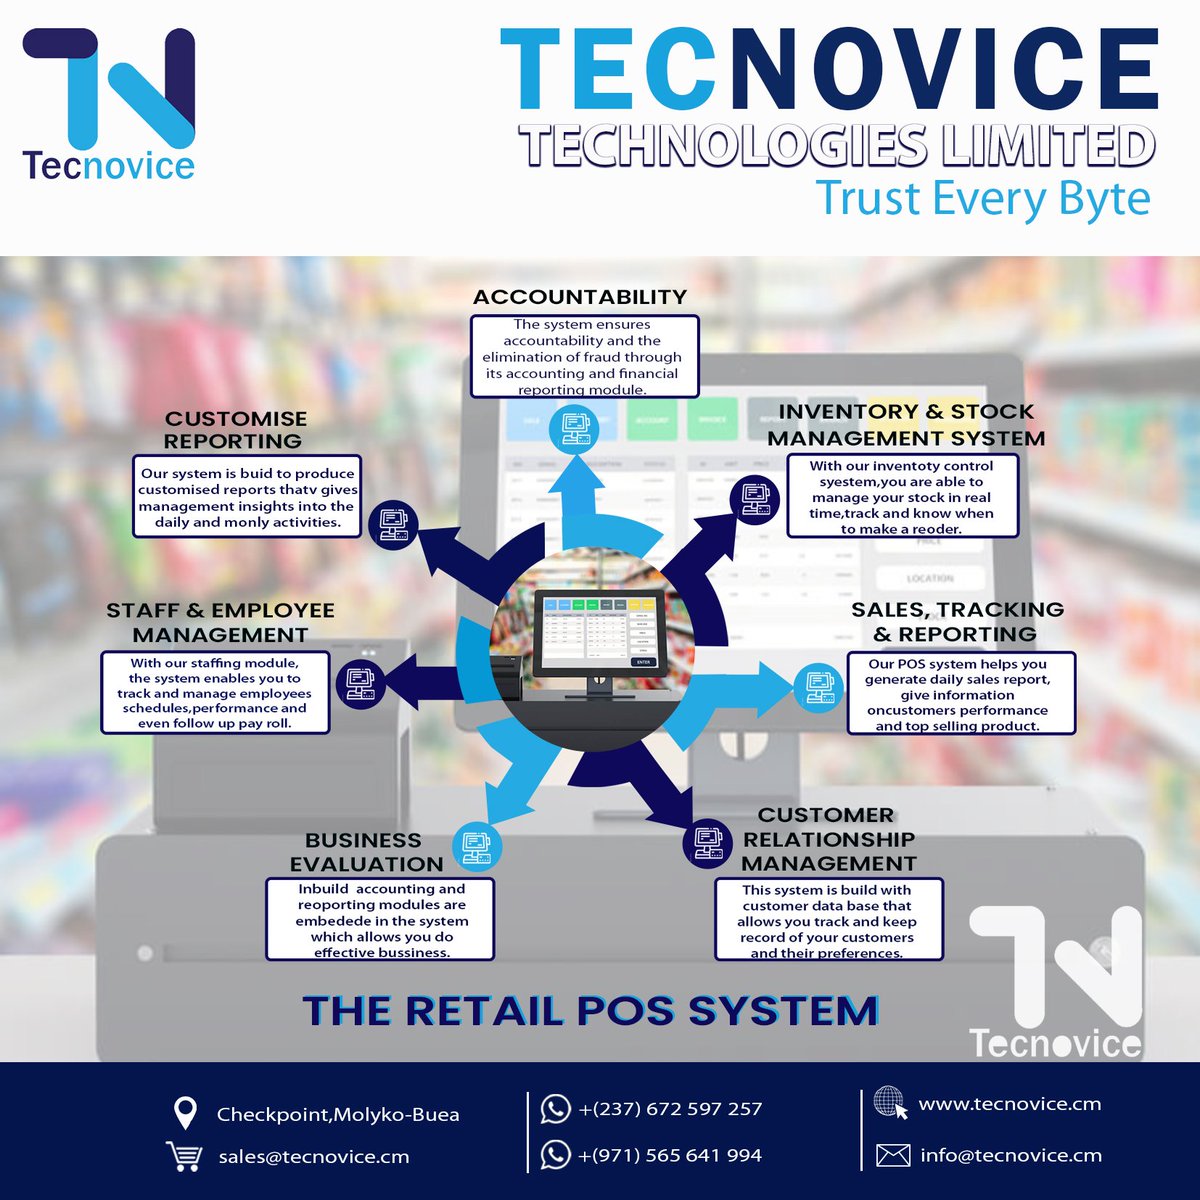 Elevate your retail game with our powerful POS system! Seamlessly manage inventory, enhance customer experiences, and skyrocket profits. Transform your business with the ultimate retail solution. #RetailTech #POSRevolution